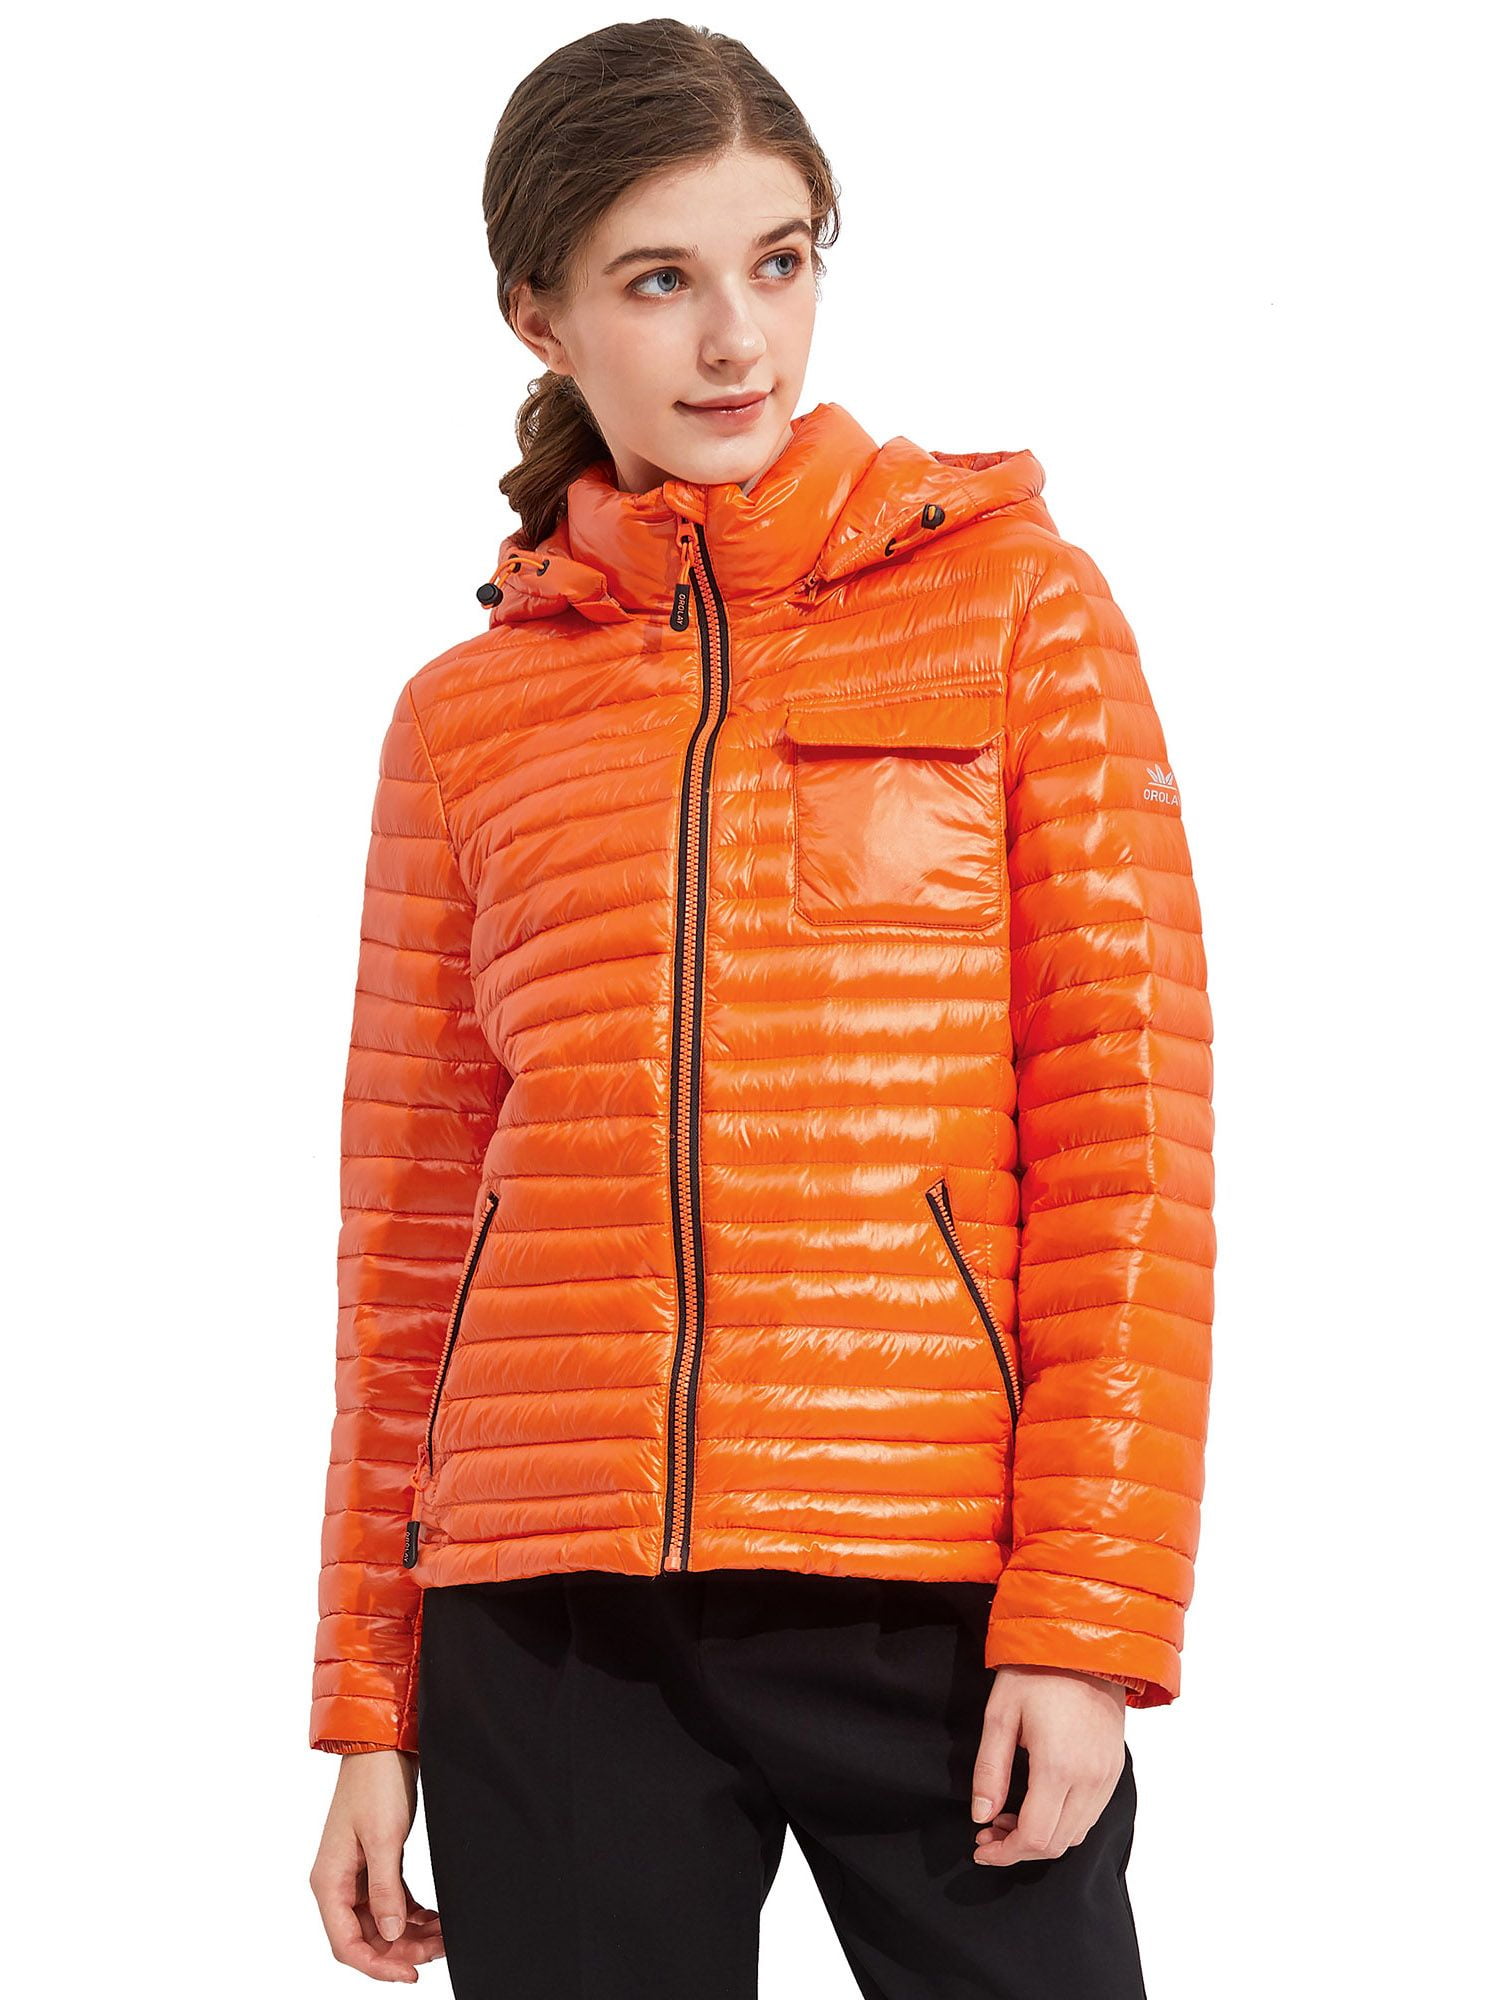 Orolay Womens Light Down Jacket Packable Winter Coat Hooded Cropped Puffer Jacket 